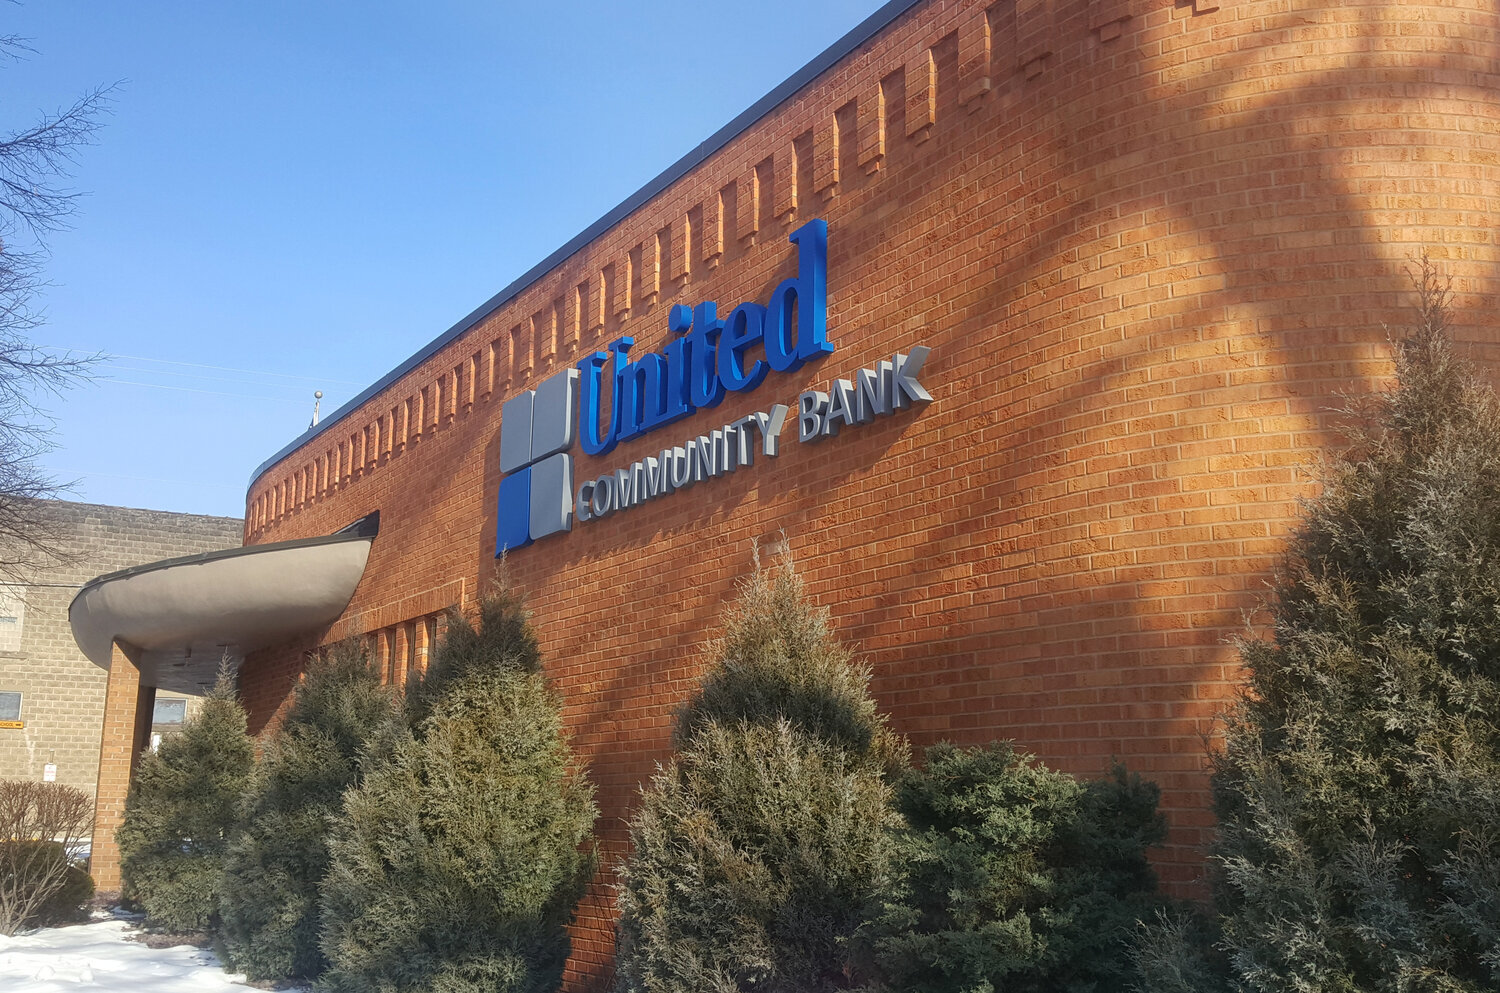   United Community Bank Exterior ID Signs  